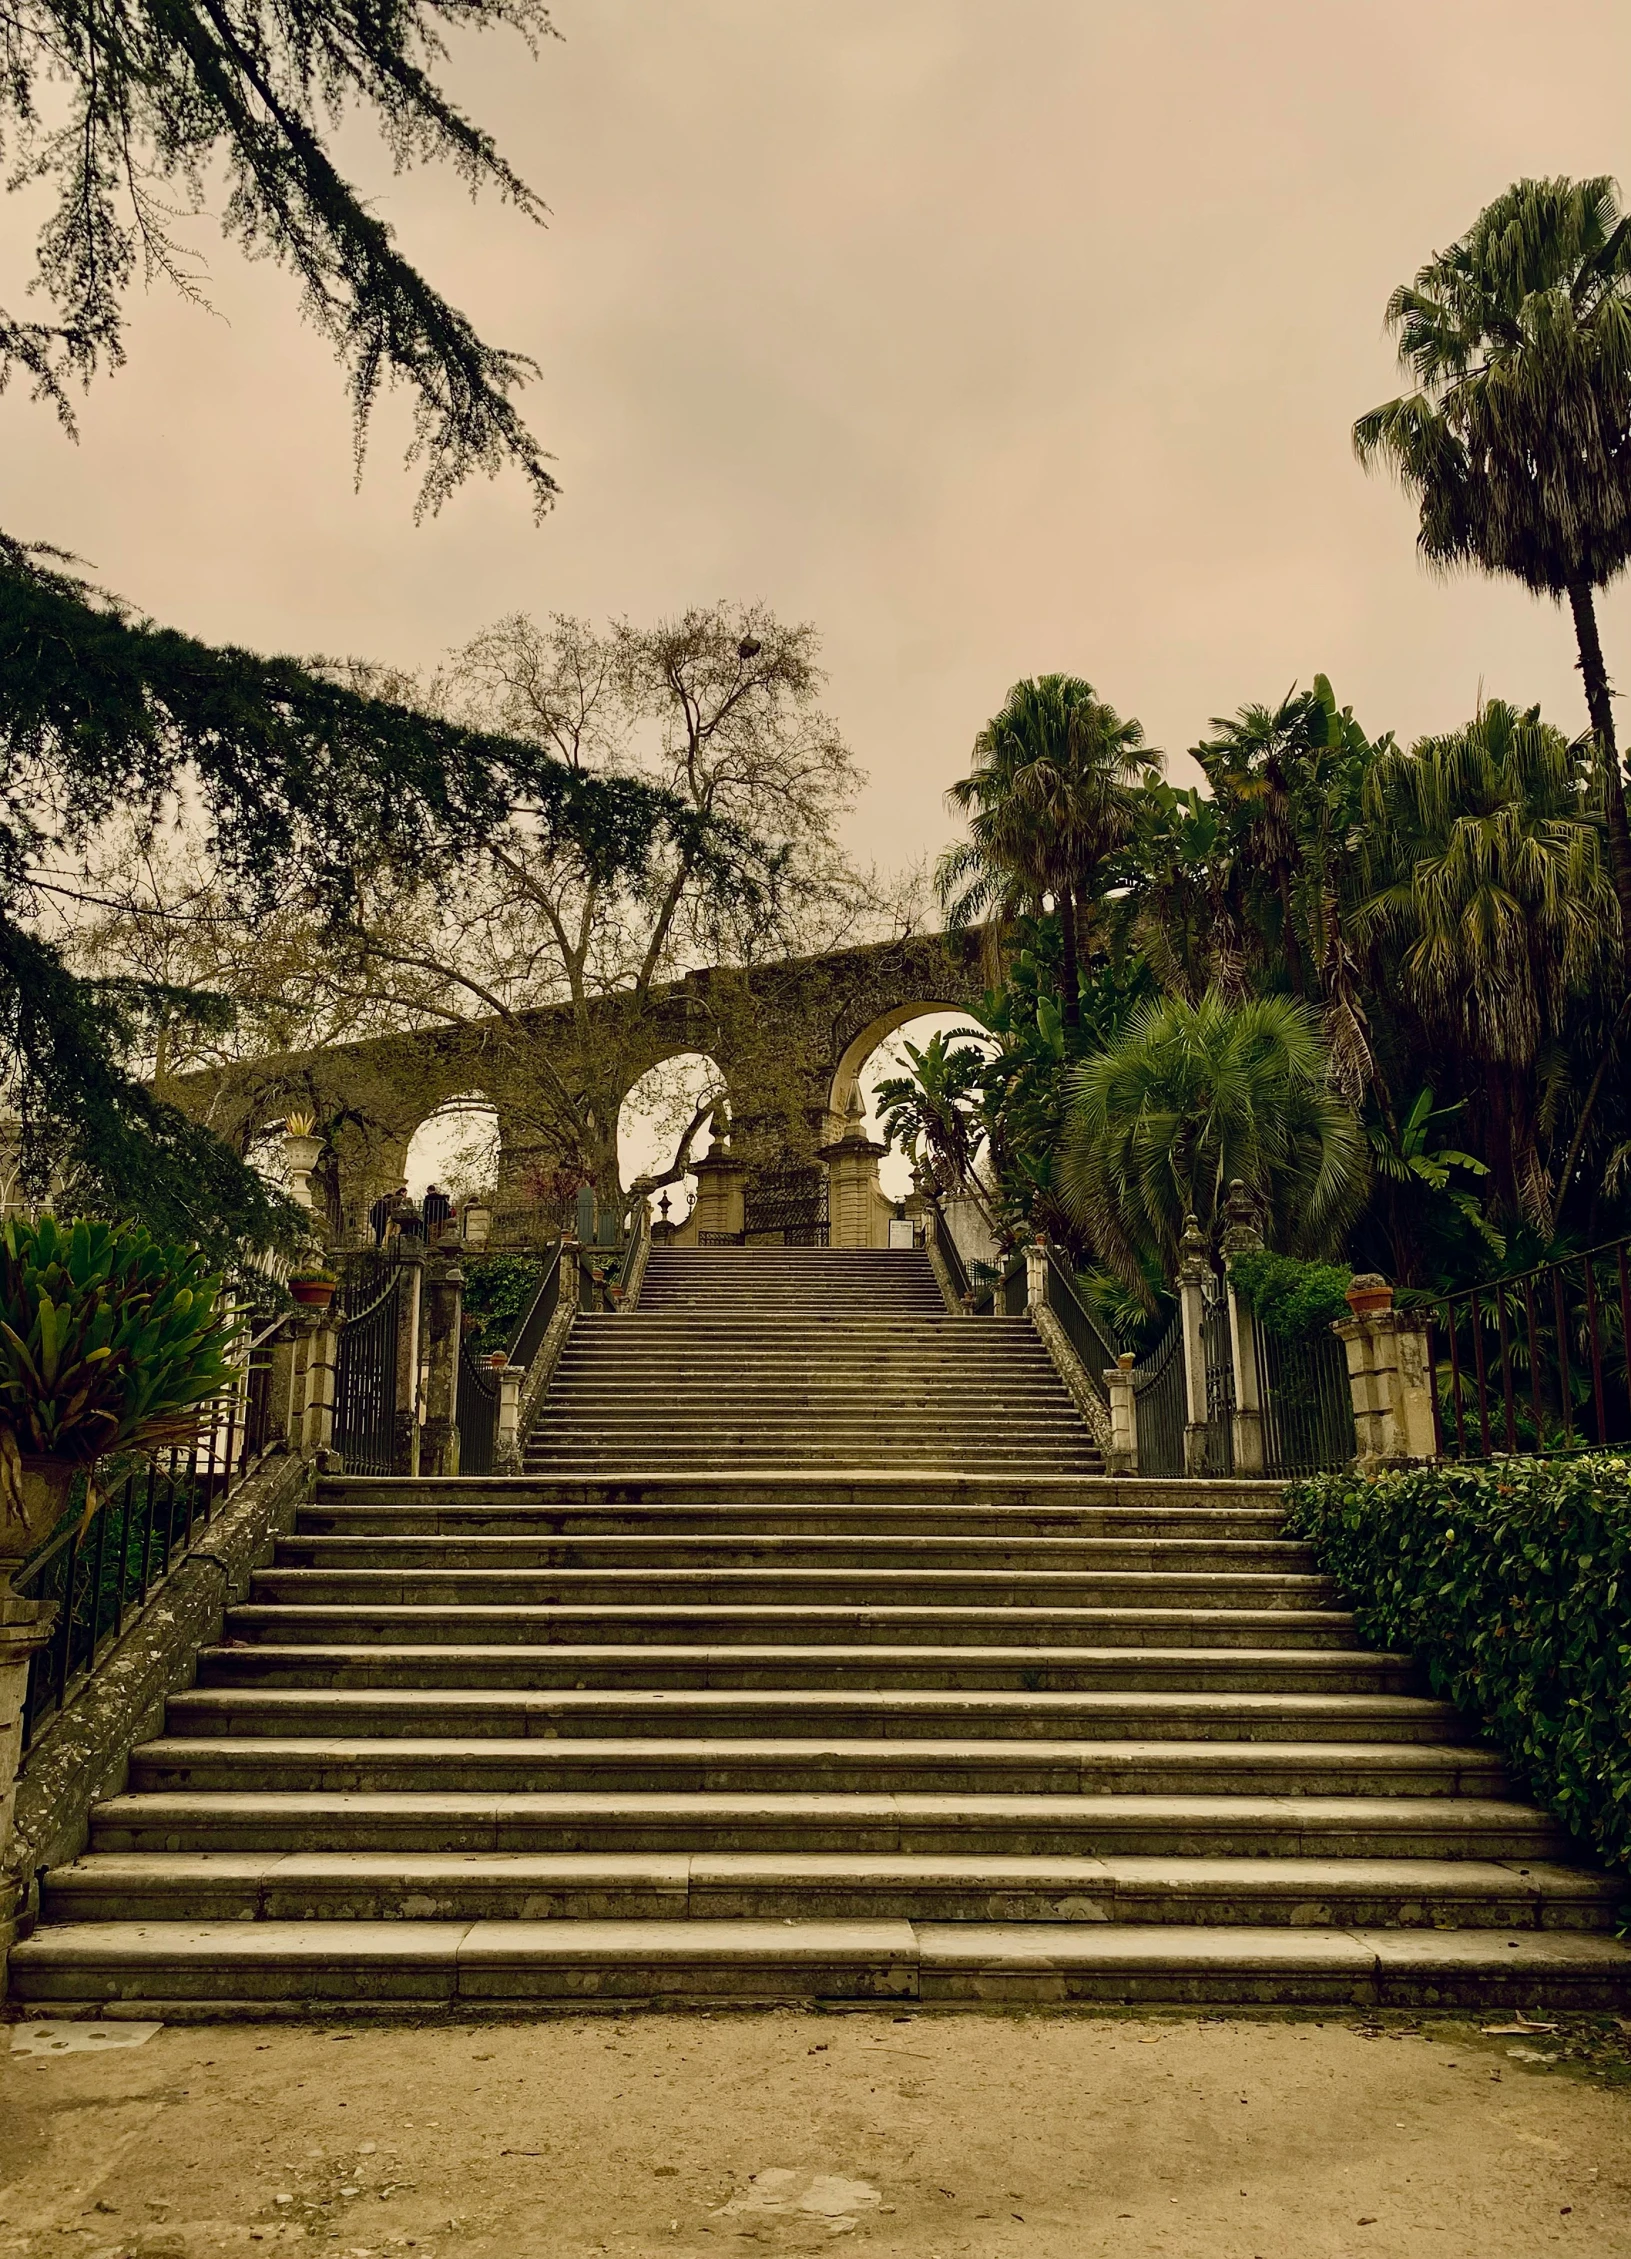 a staircase in front of trees and bushes